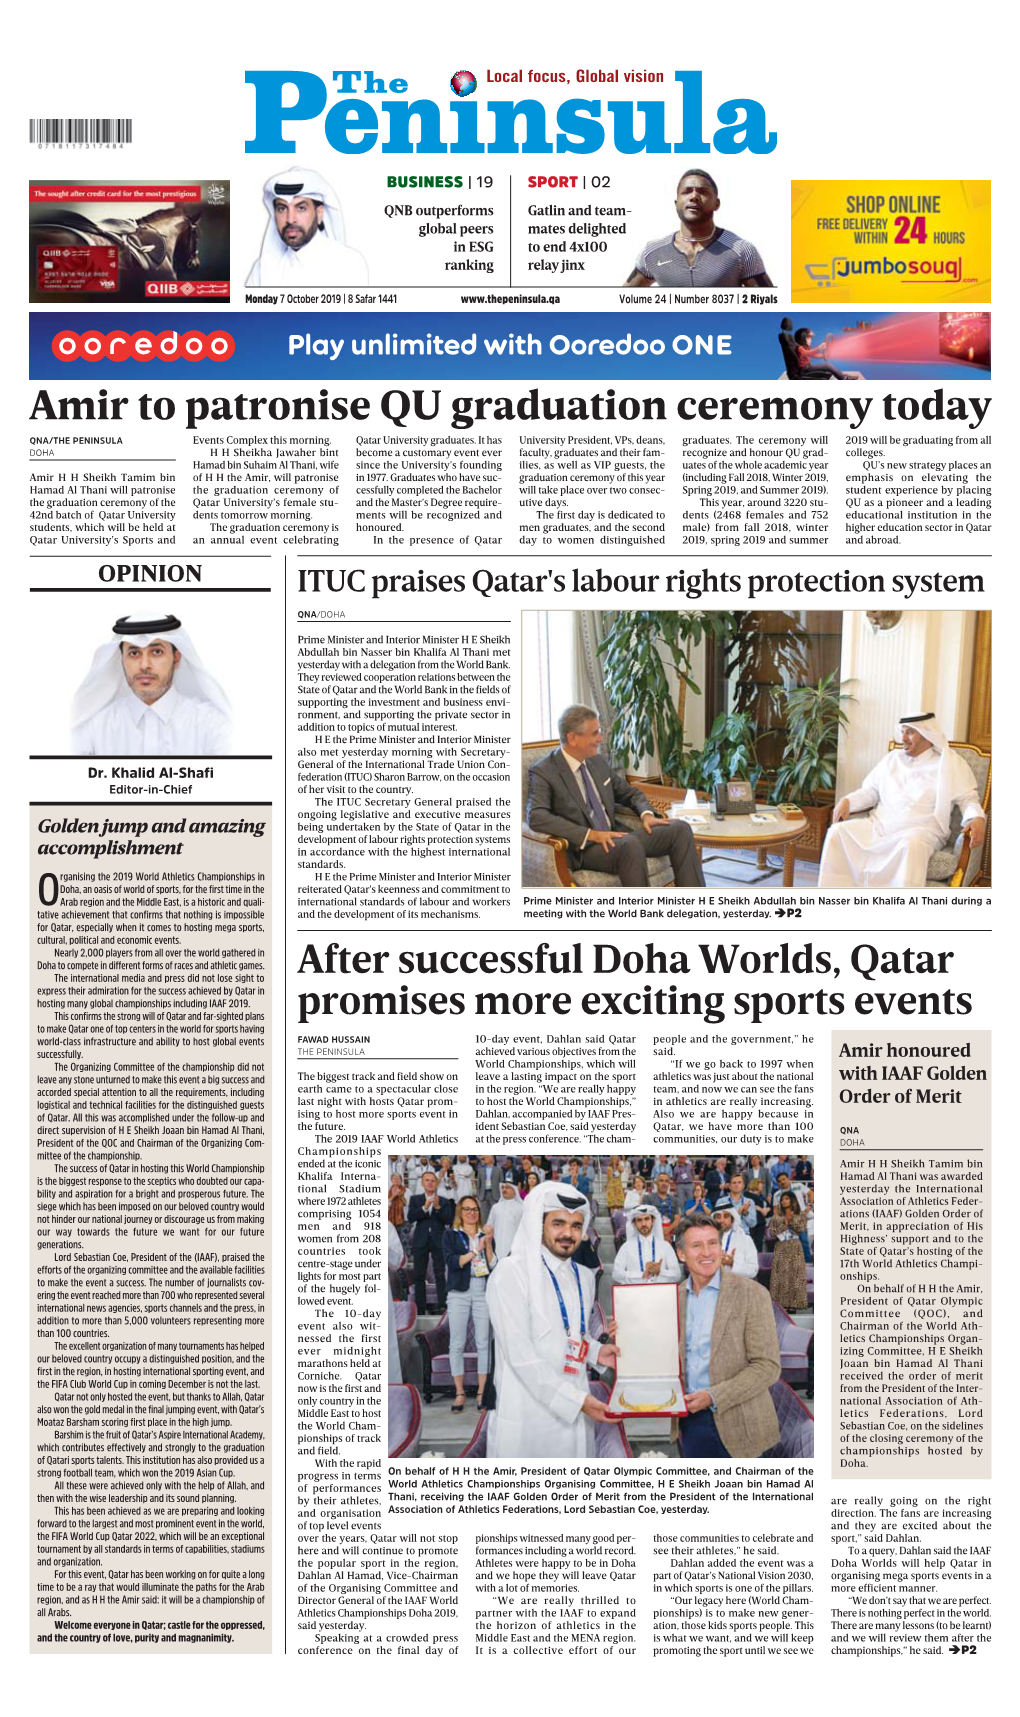 Amir to Patronise QU Graduation Ceremony Today QNA/THE PENINSULA Events Complex This Morning